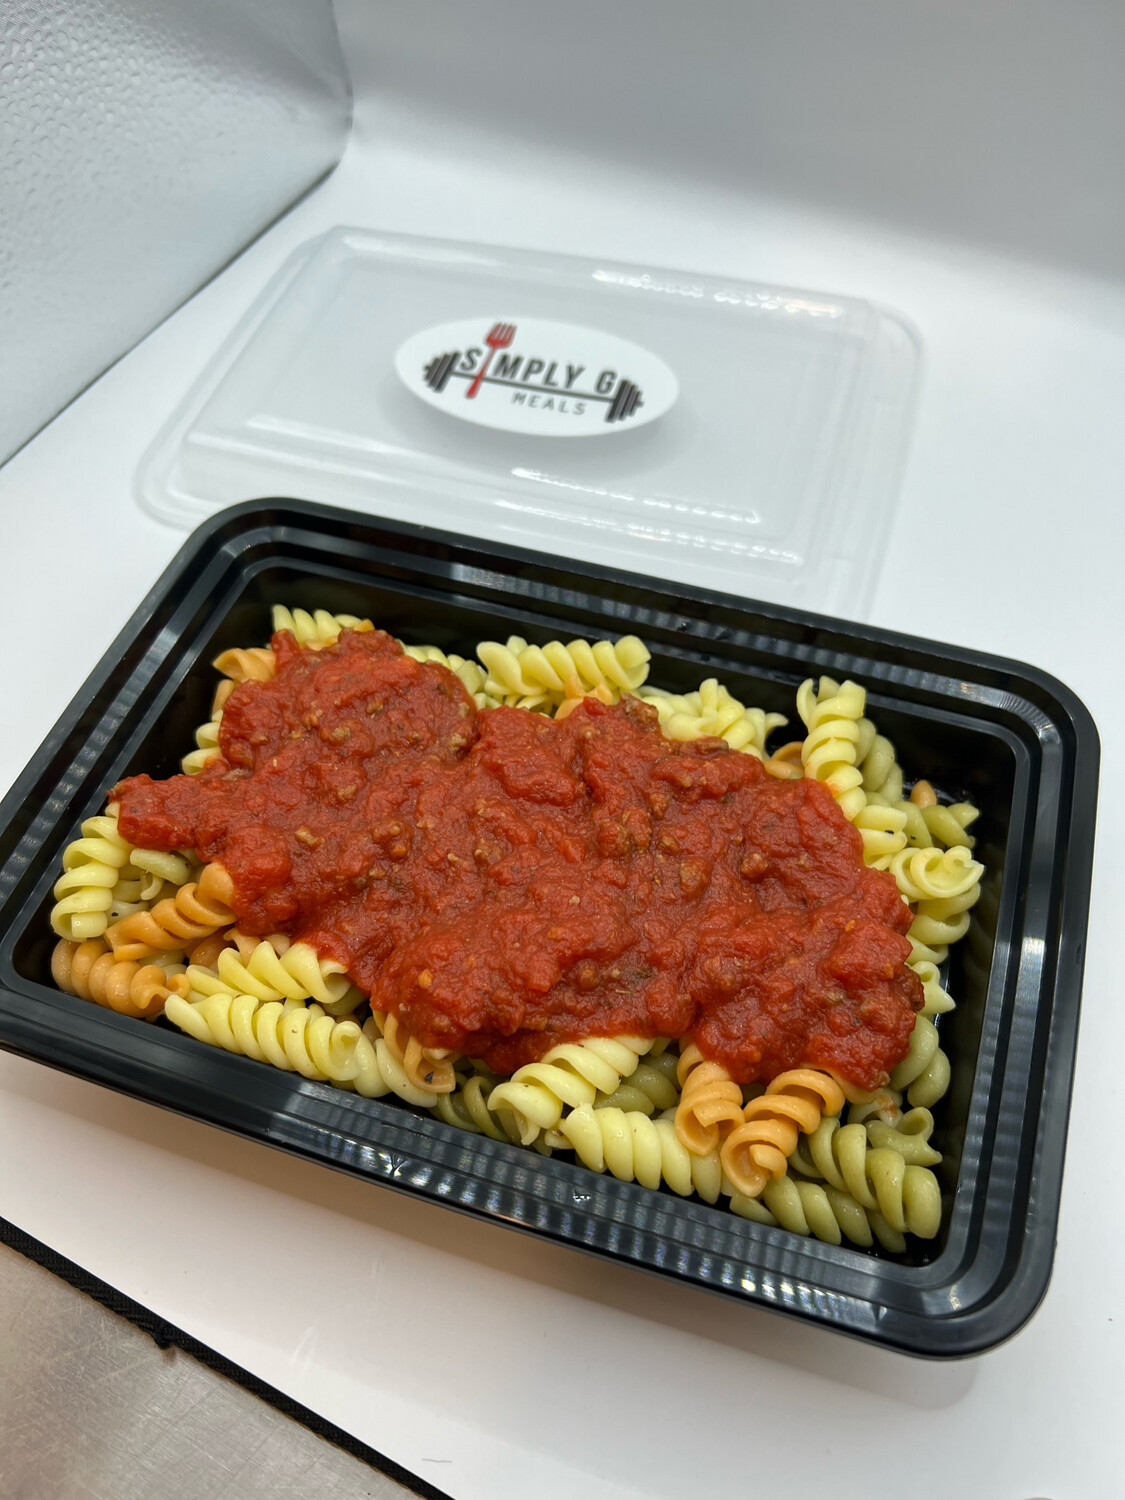 Simply G Meal Pasta